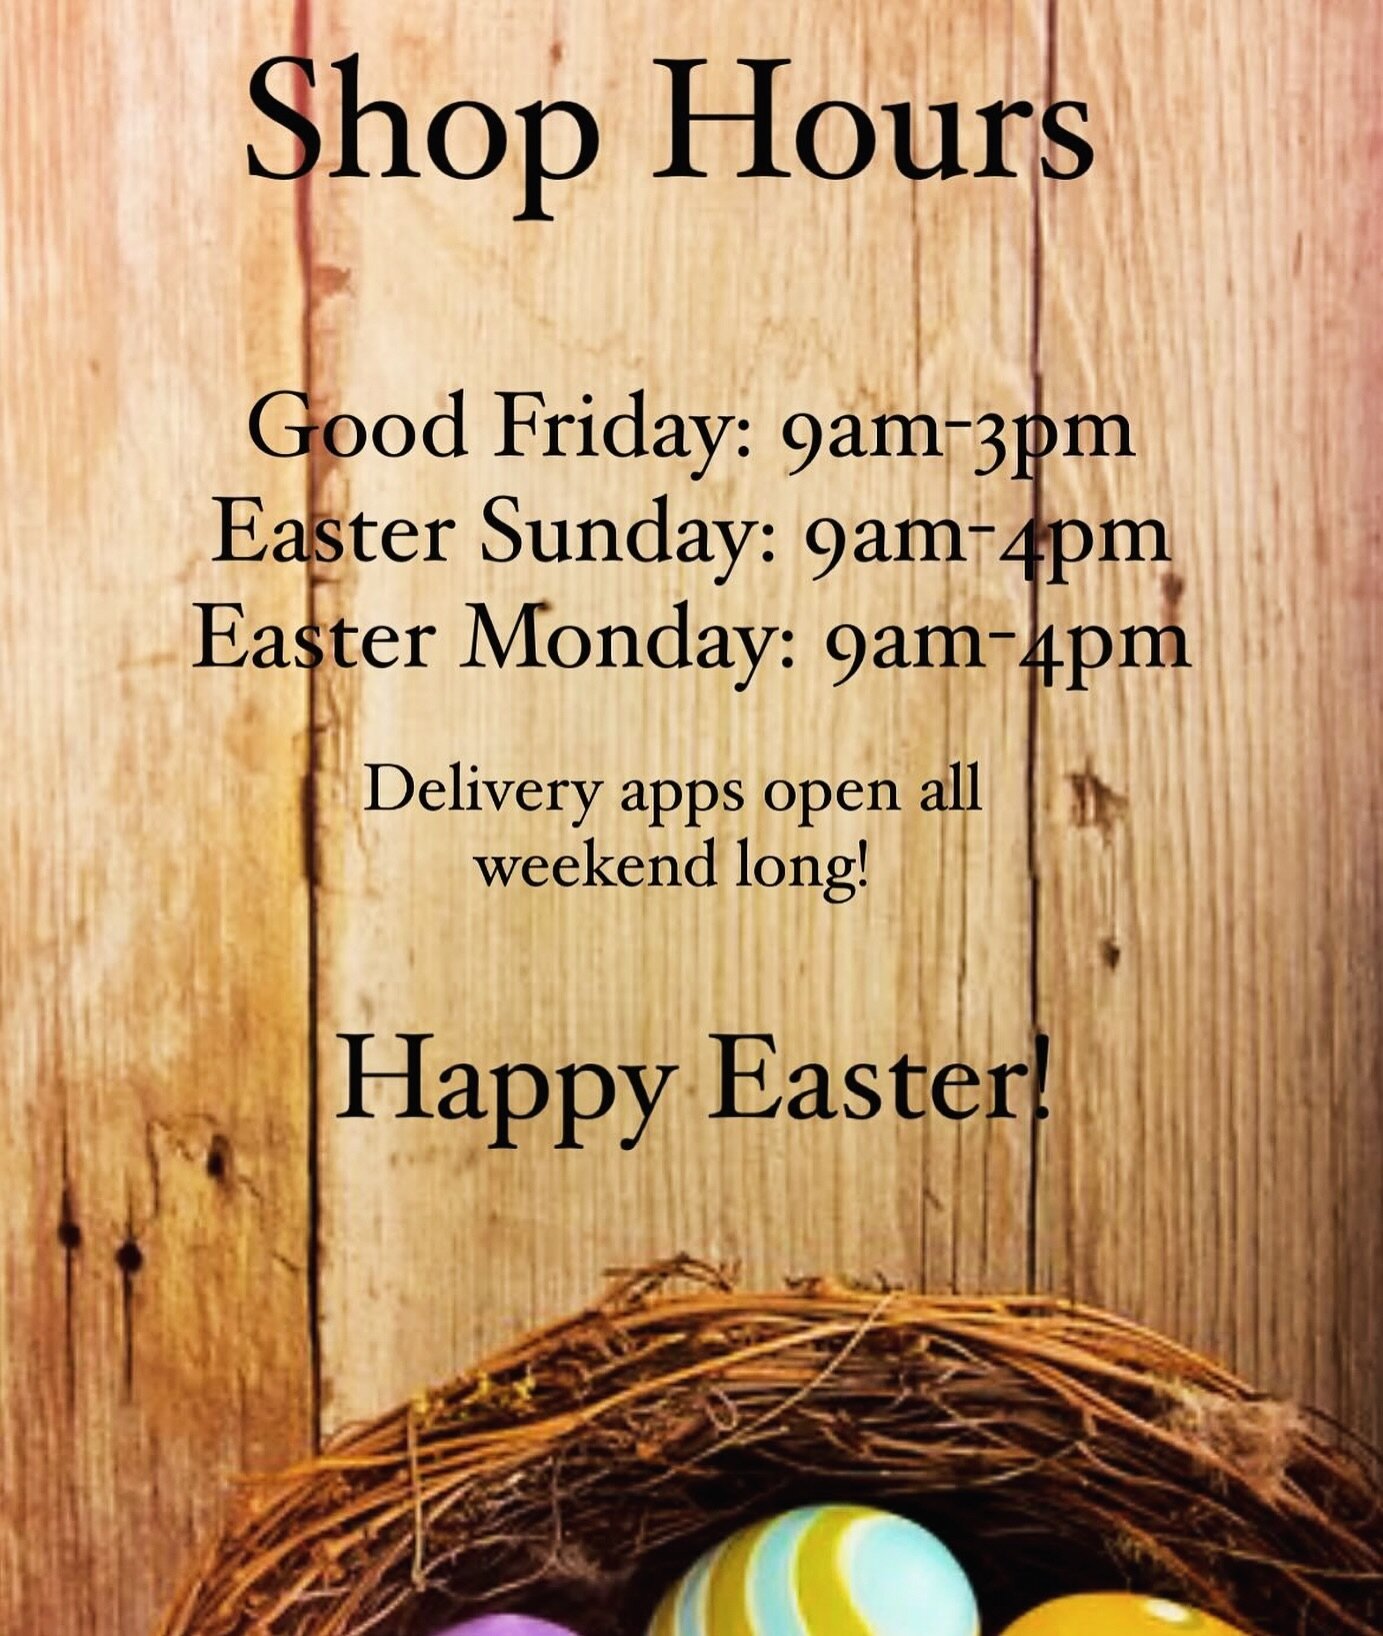 We are open all weekend long. Happy Easter and see you at The Nut! 

#mapleridgebc #thenutca #wheregoodthingsgrow #bc #bcbusiness #mapleridge #coffeeshop #easter